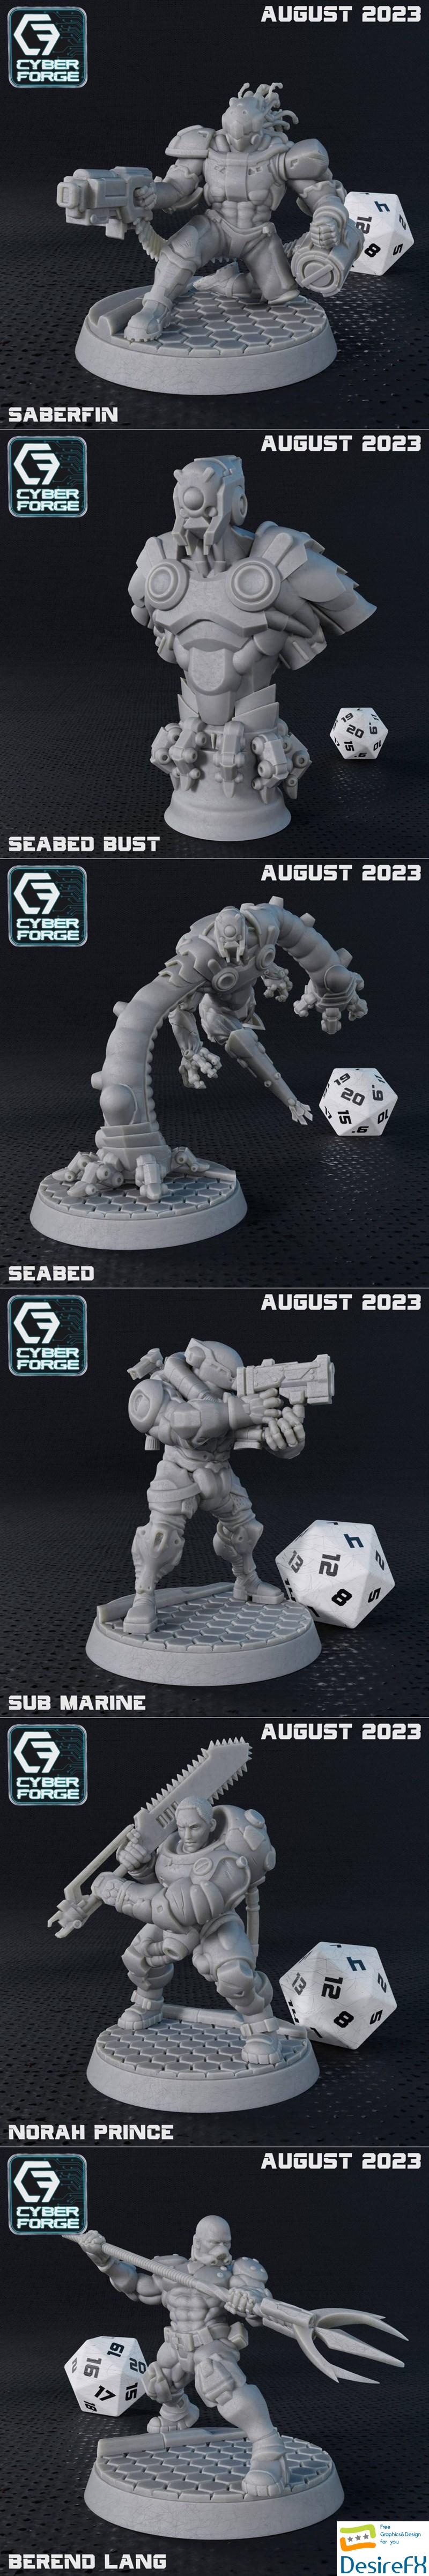 Cyber Forge - Under the Sea August 2023 3D Print